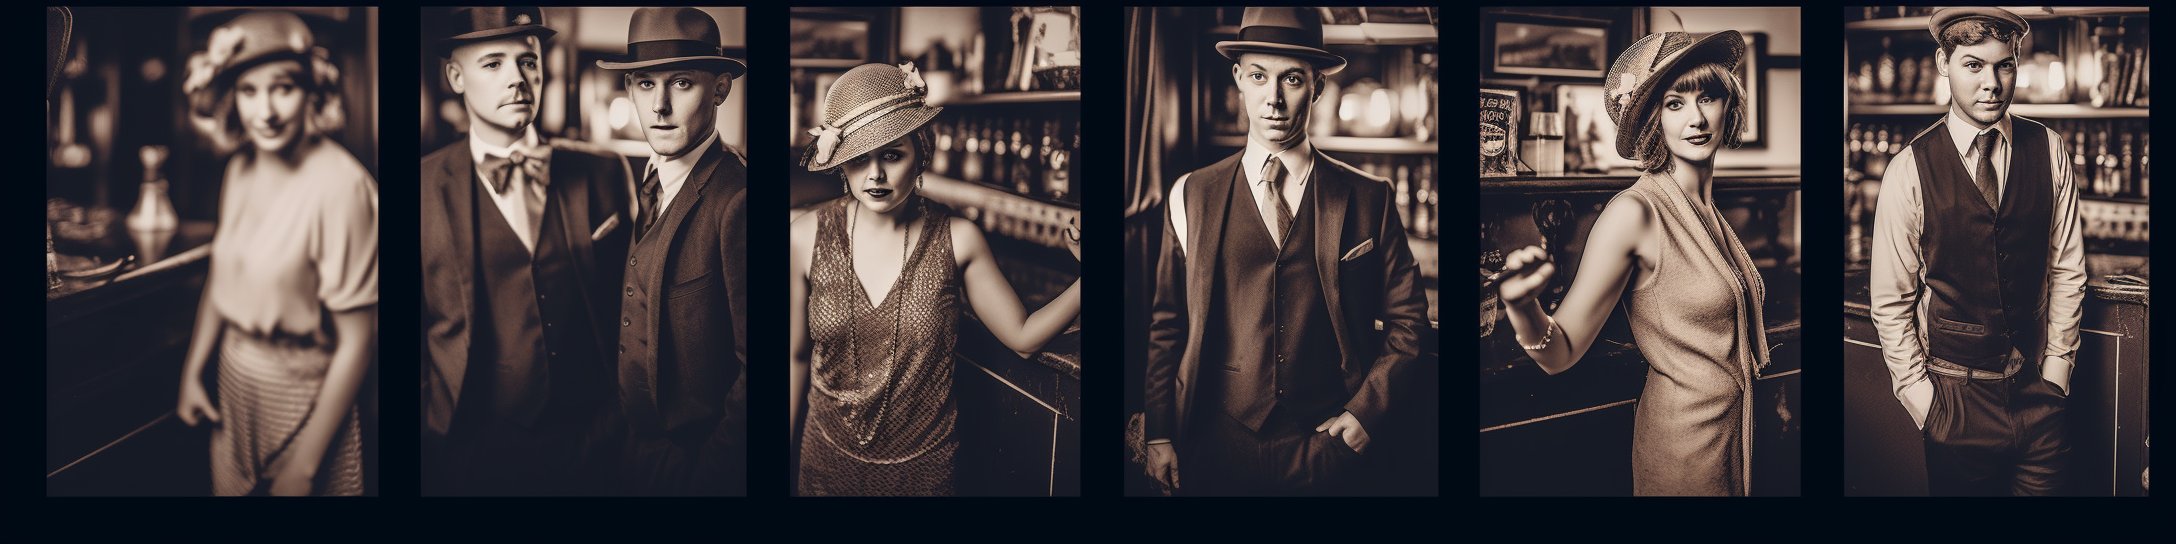 1920s Costumes, Flapper Dresses and Gangster Suits